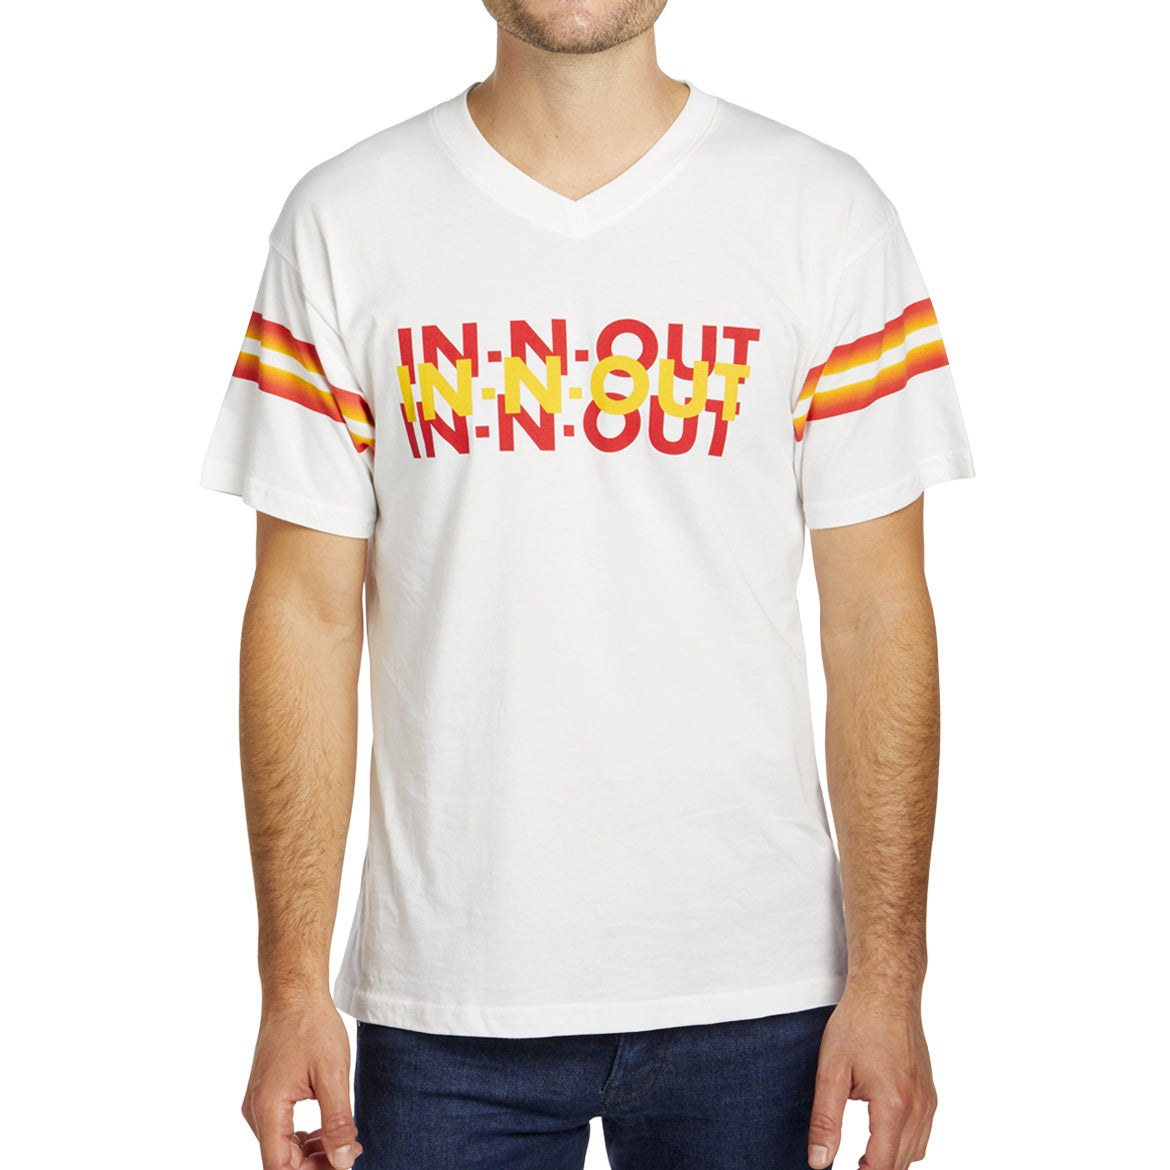 VINTAGE FOOTBALL TEE – In-N-Out Burger Company Store